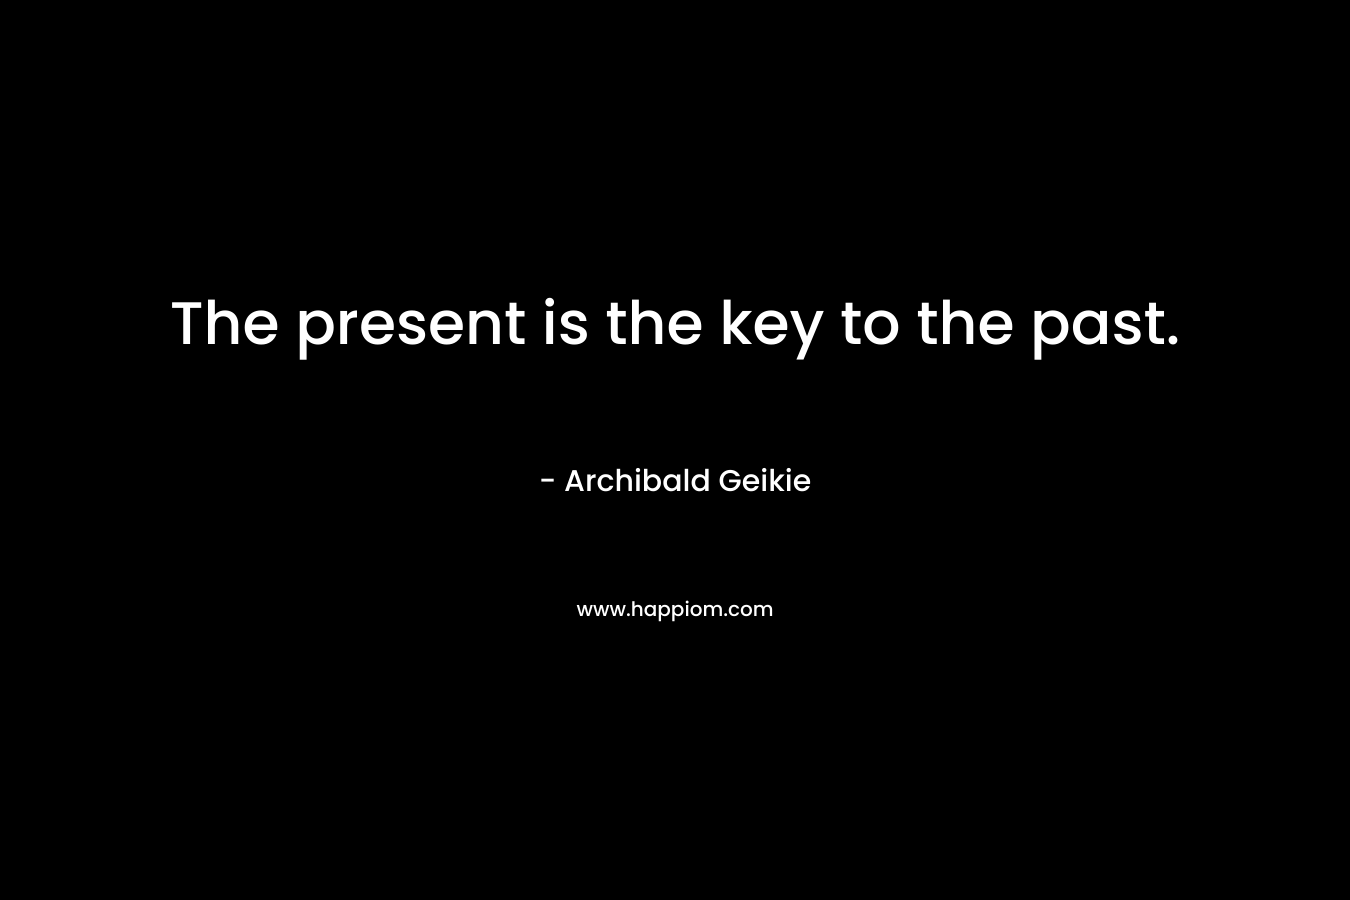 The present is the key to the past. – Archibald Geikie